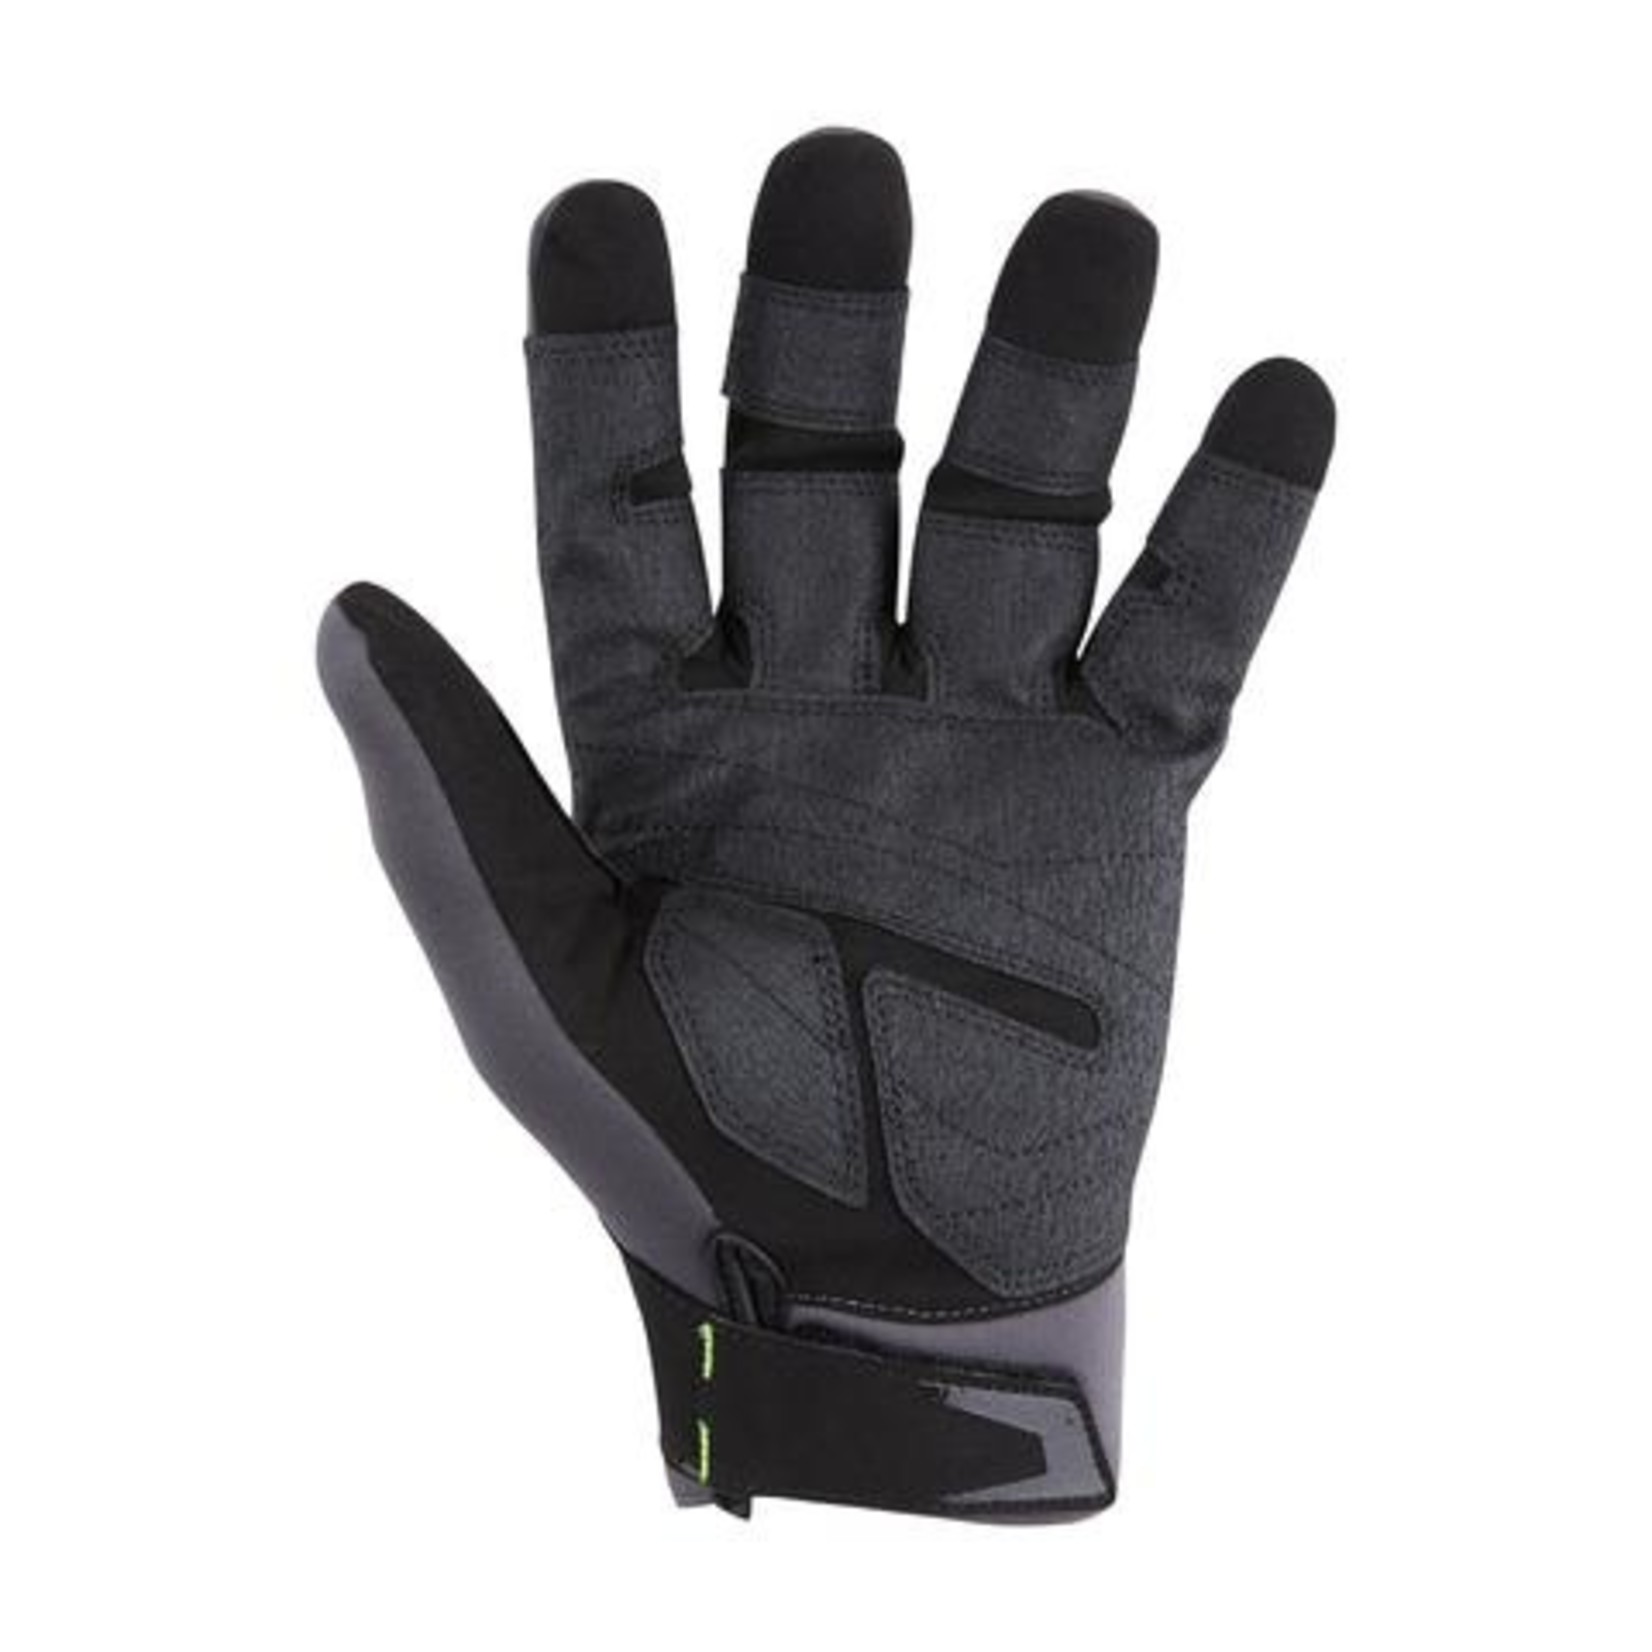 Mustang Survival Mustang Survival EP 3250 Full Finger Glove - Closeout